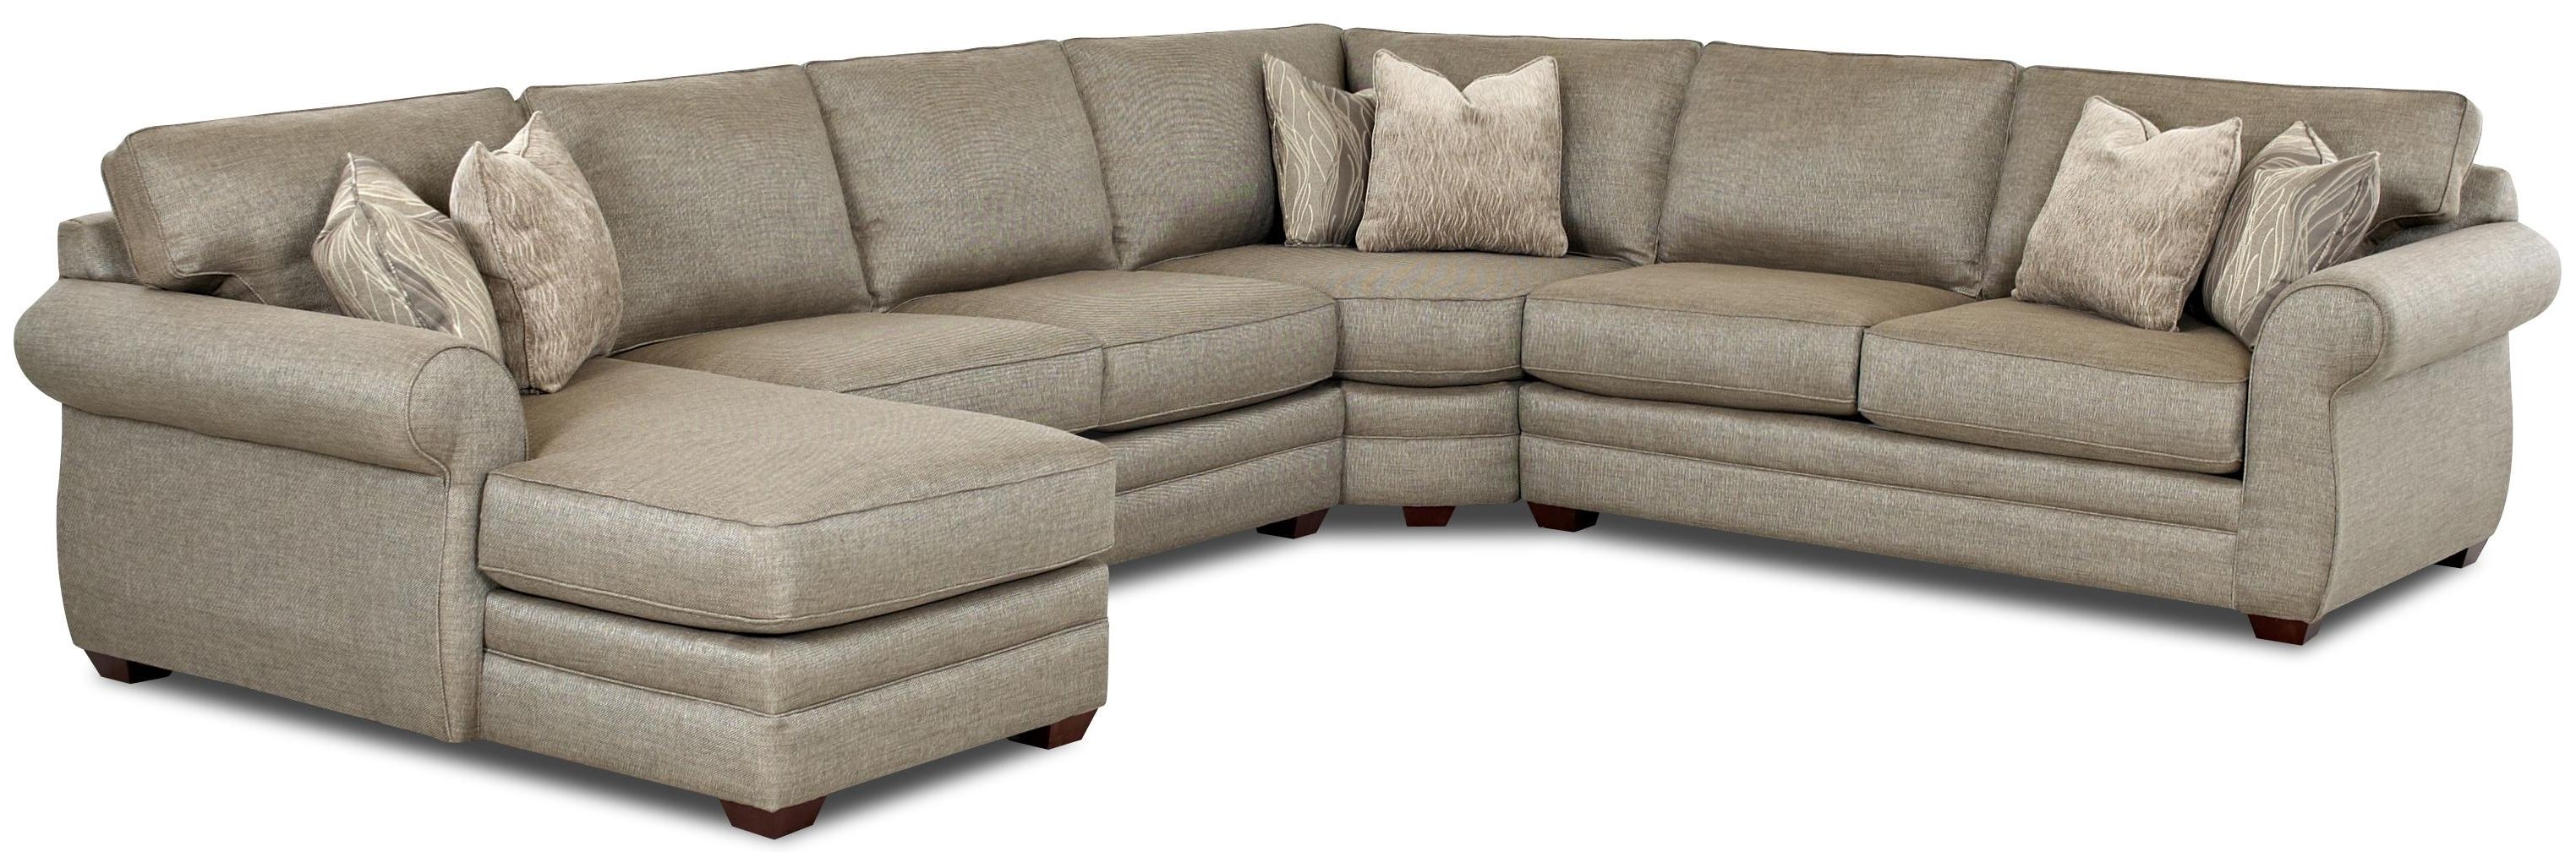 Most Recently Released Virginia Beach Sectional Sofas Pertaining To Klaussner Clanton Transitional Sectional Sofa With Right Chaise (View 19 of 20)